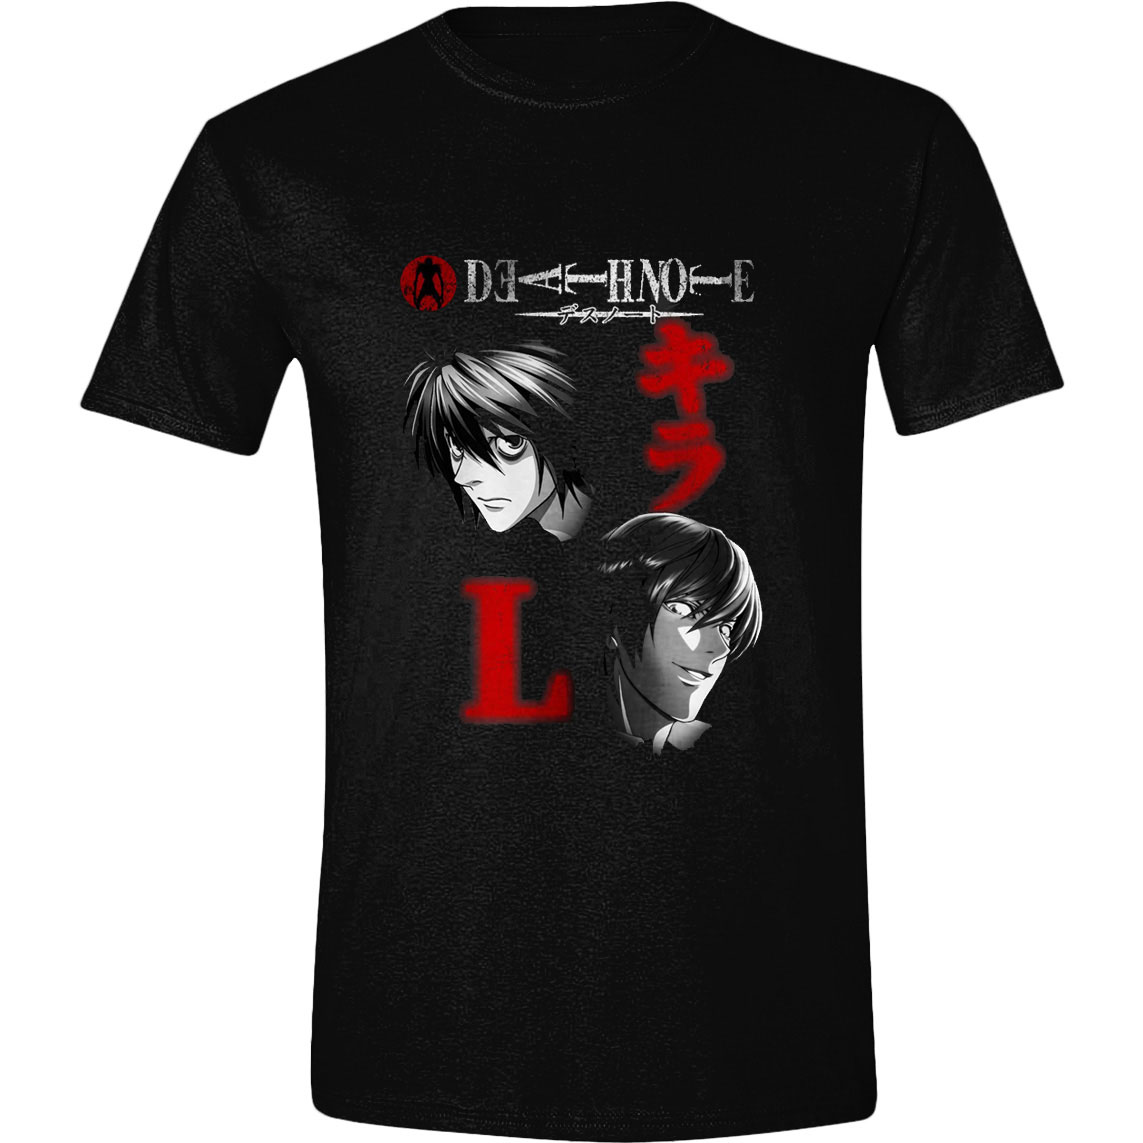 Death Note T-Shirt Written Name  Size M